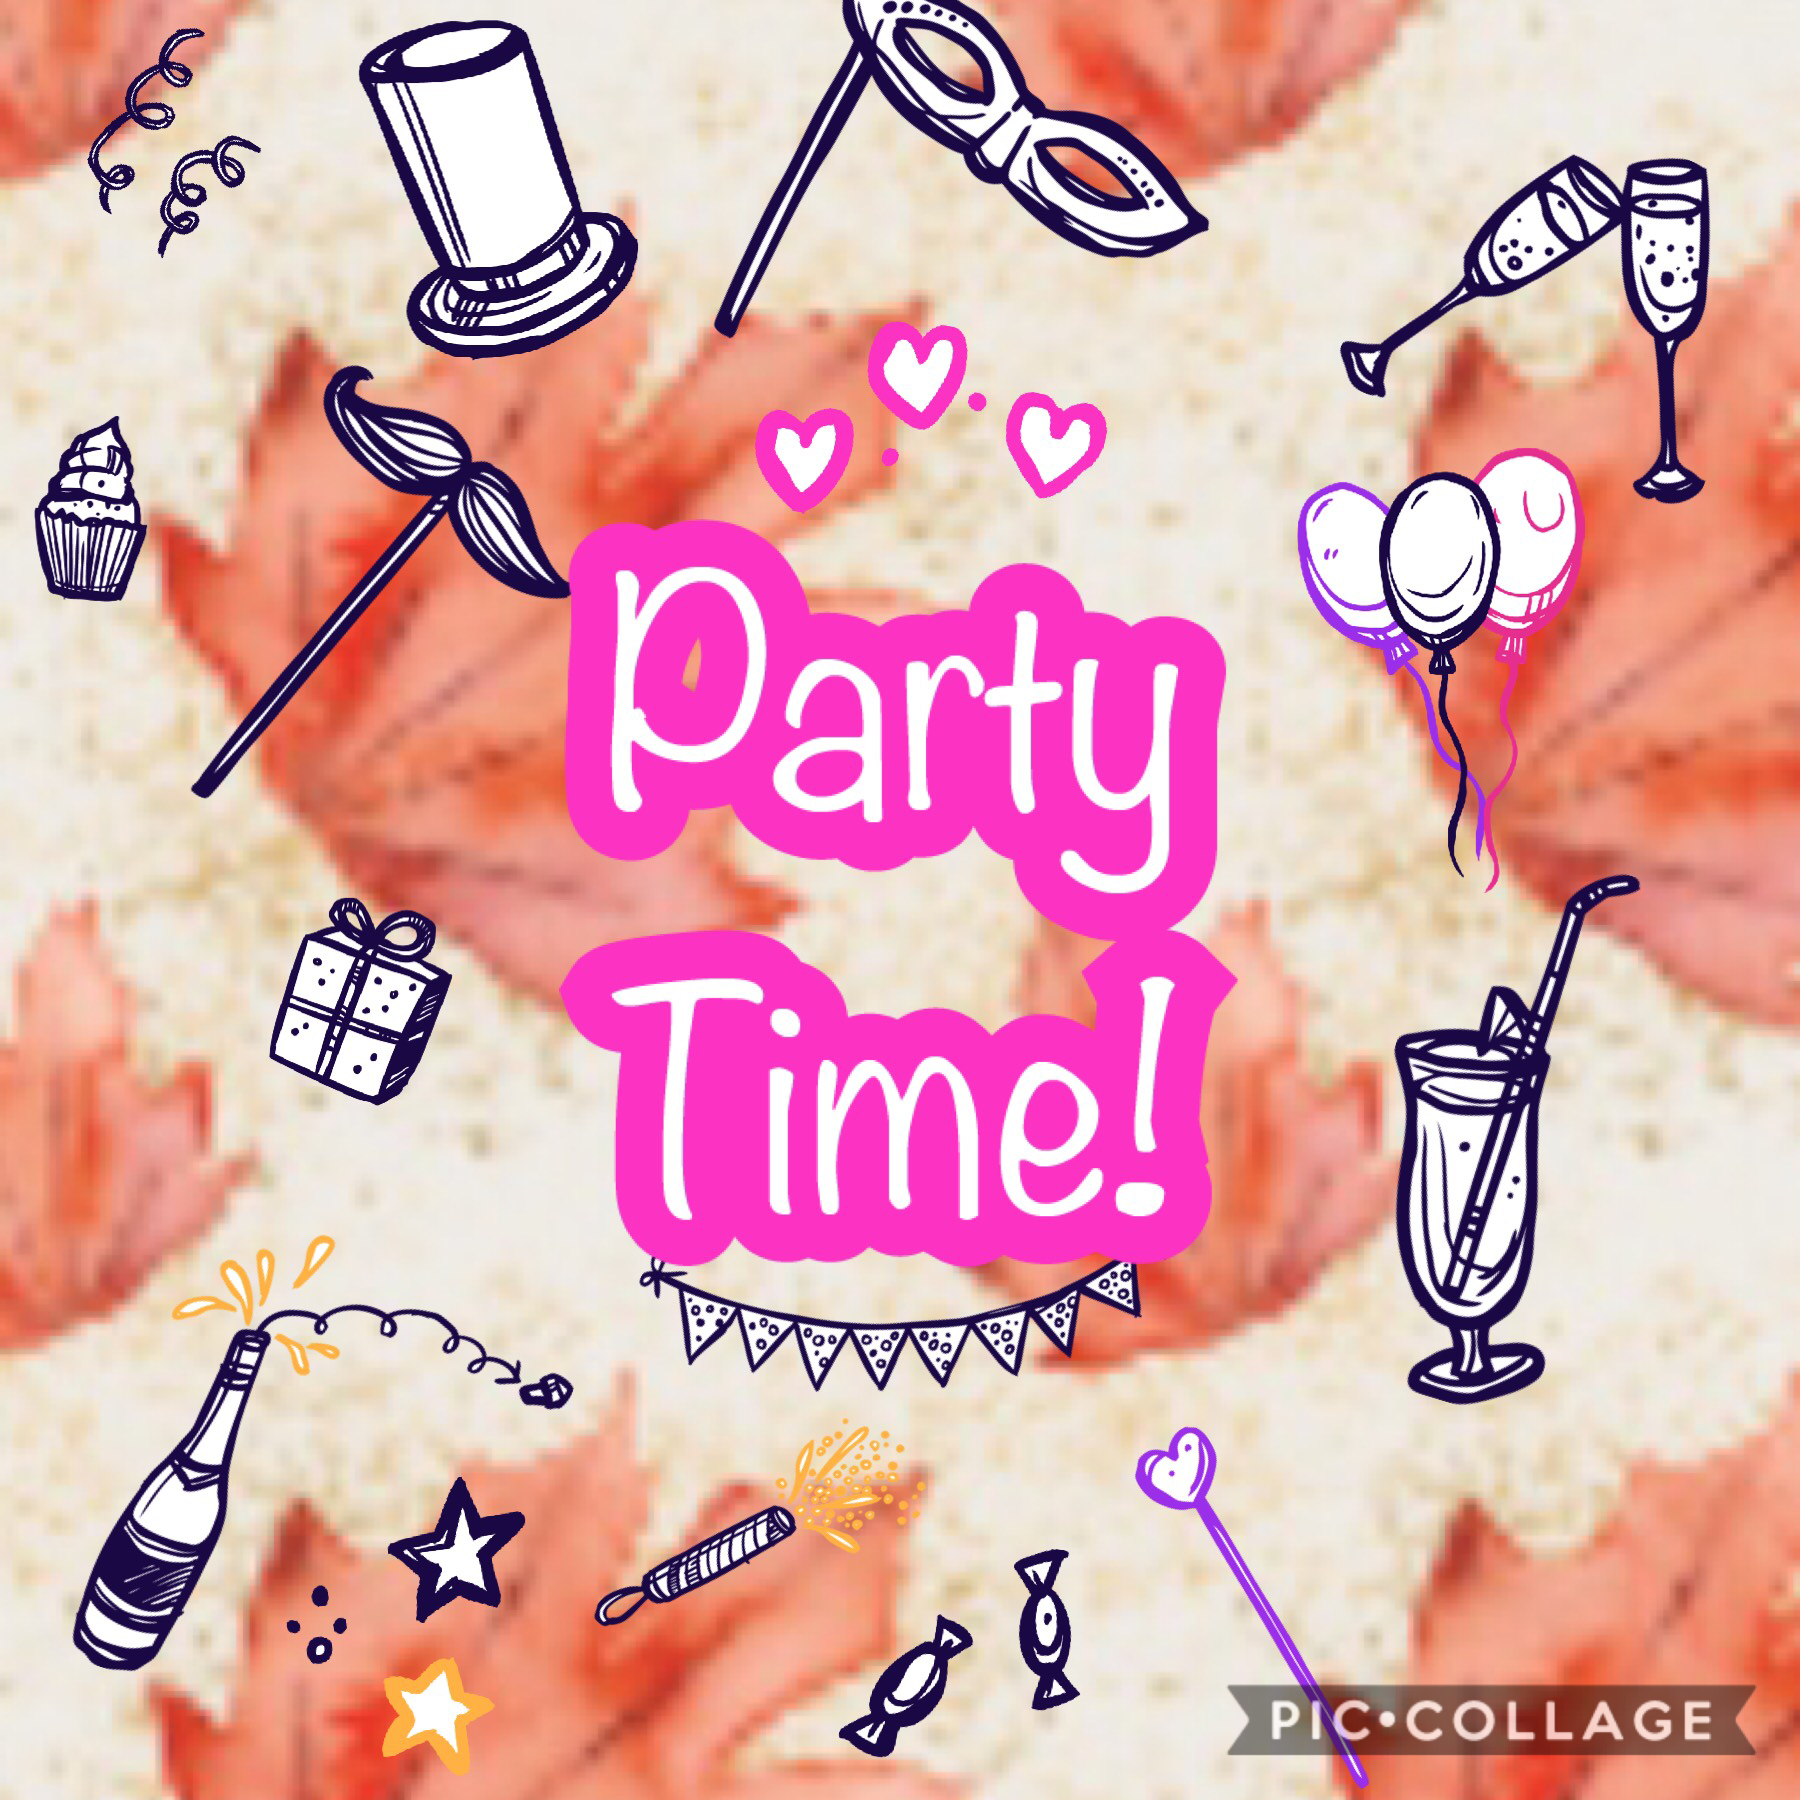 #partytime!